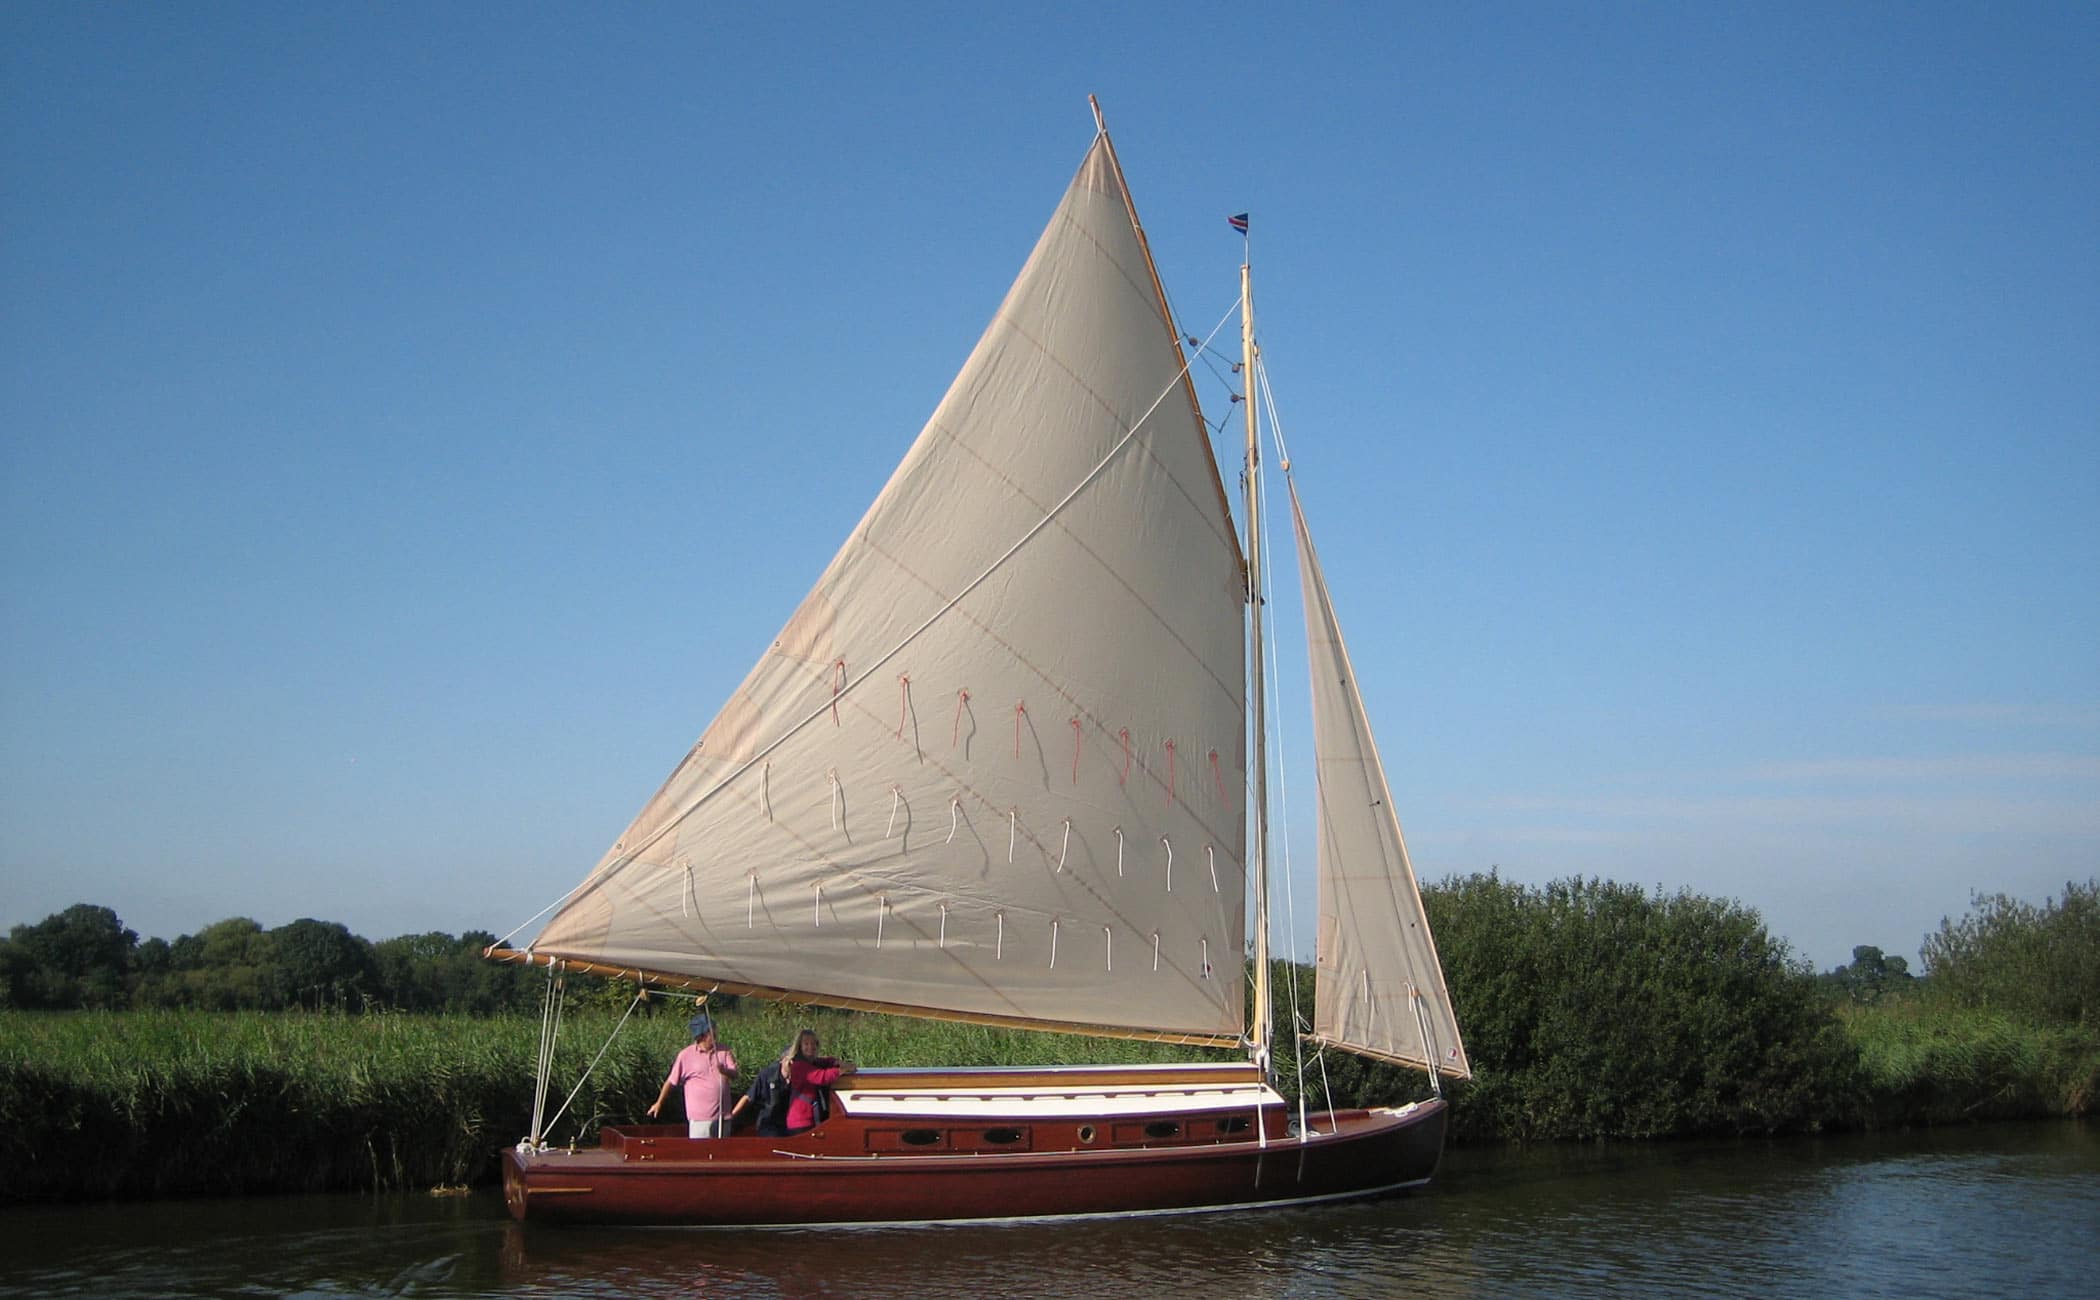 Lucent, the traditional Norfolk Broads Lullaby class cabin yacht sailing on the Norfolk Broads.